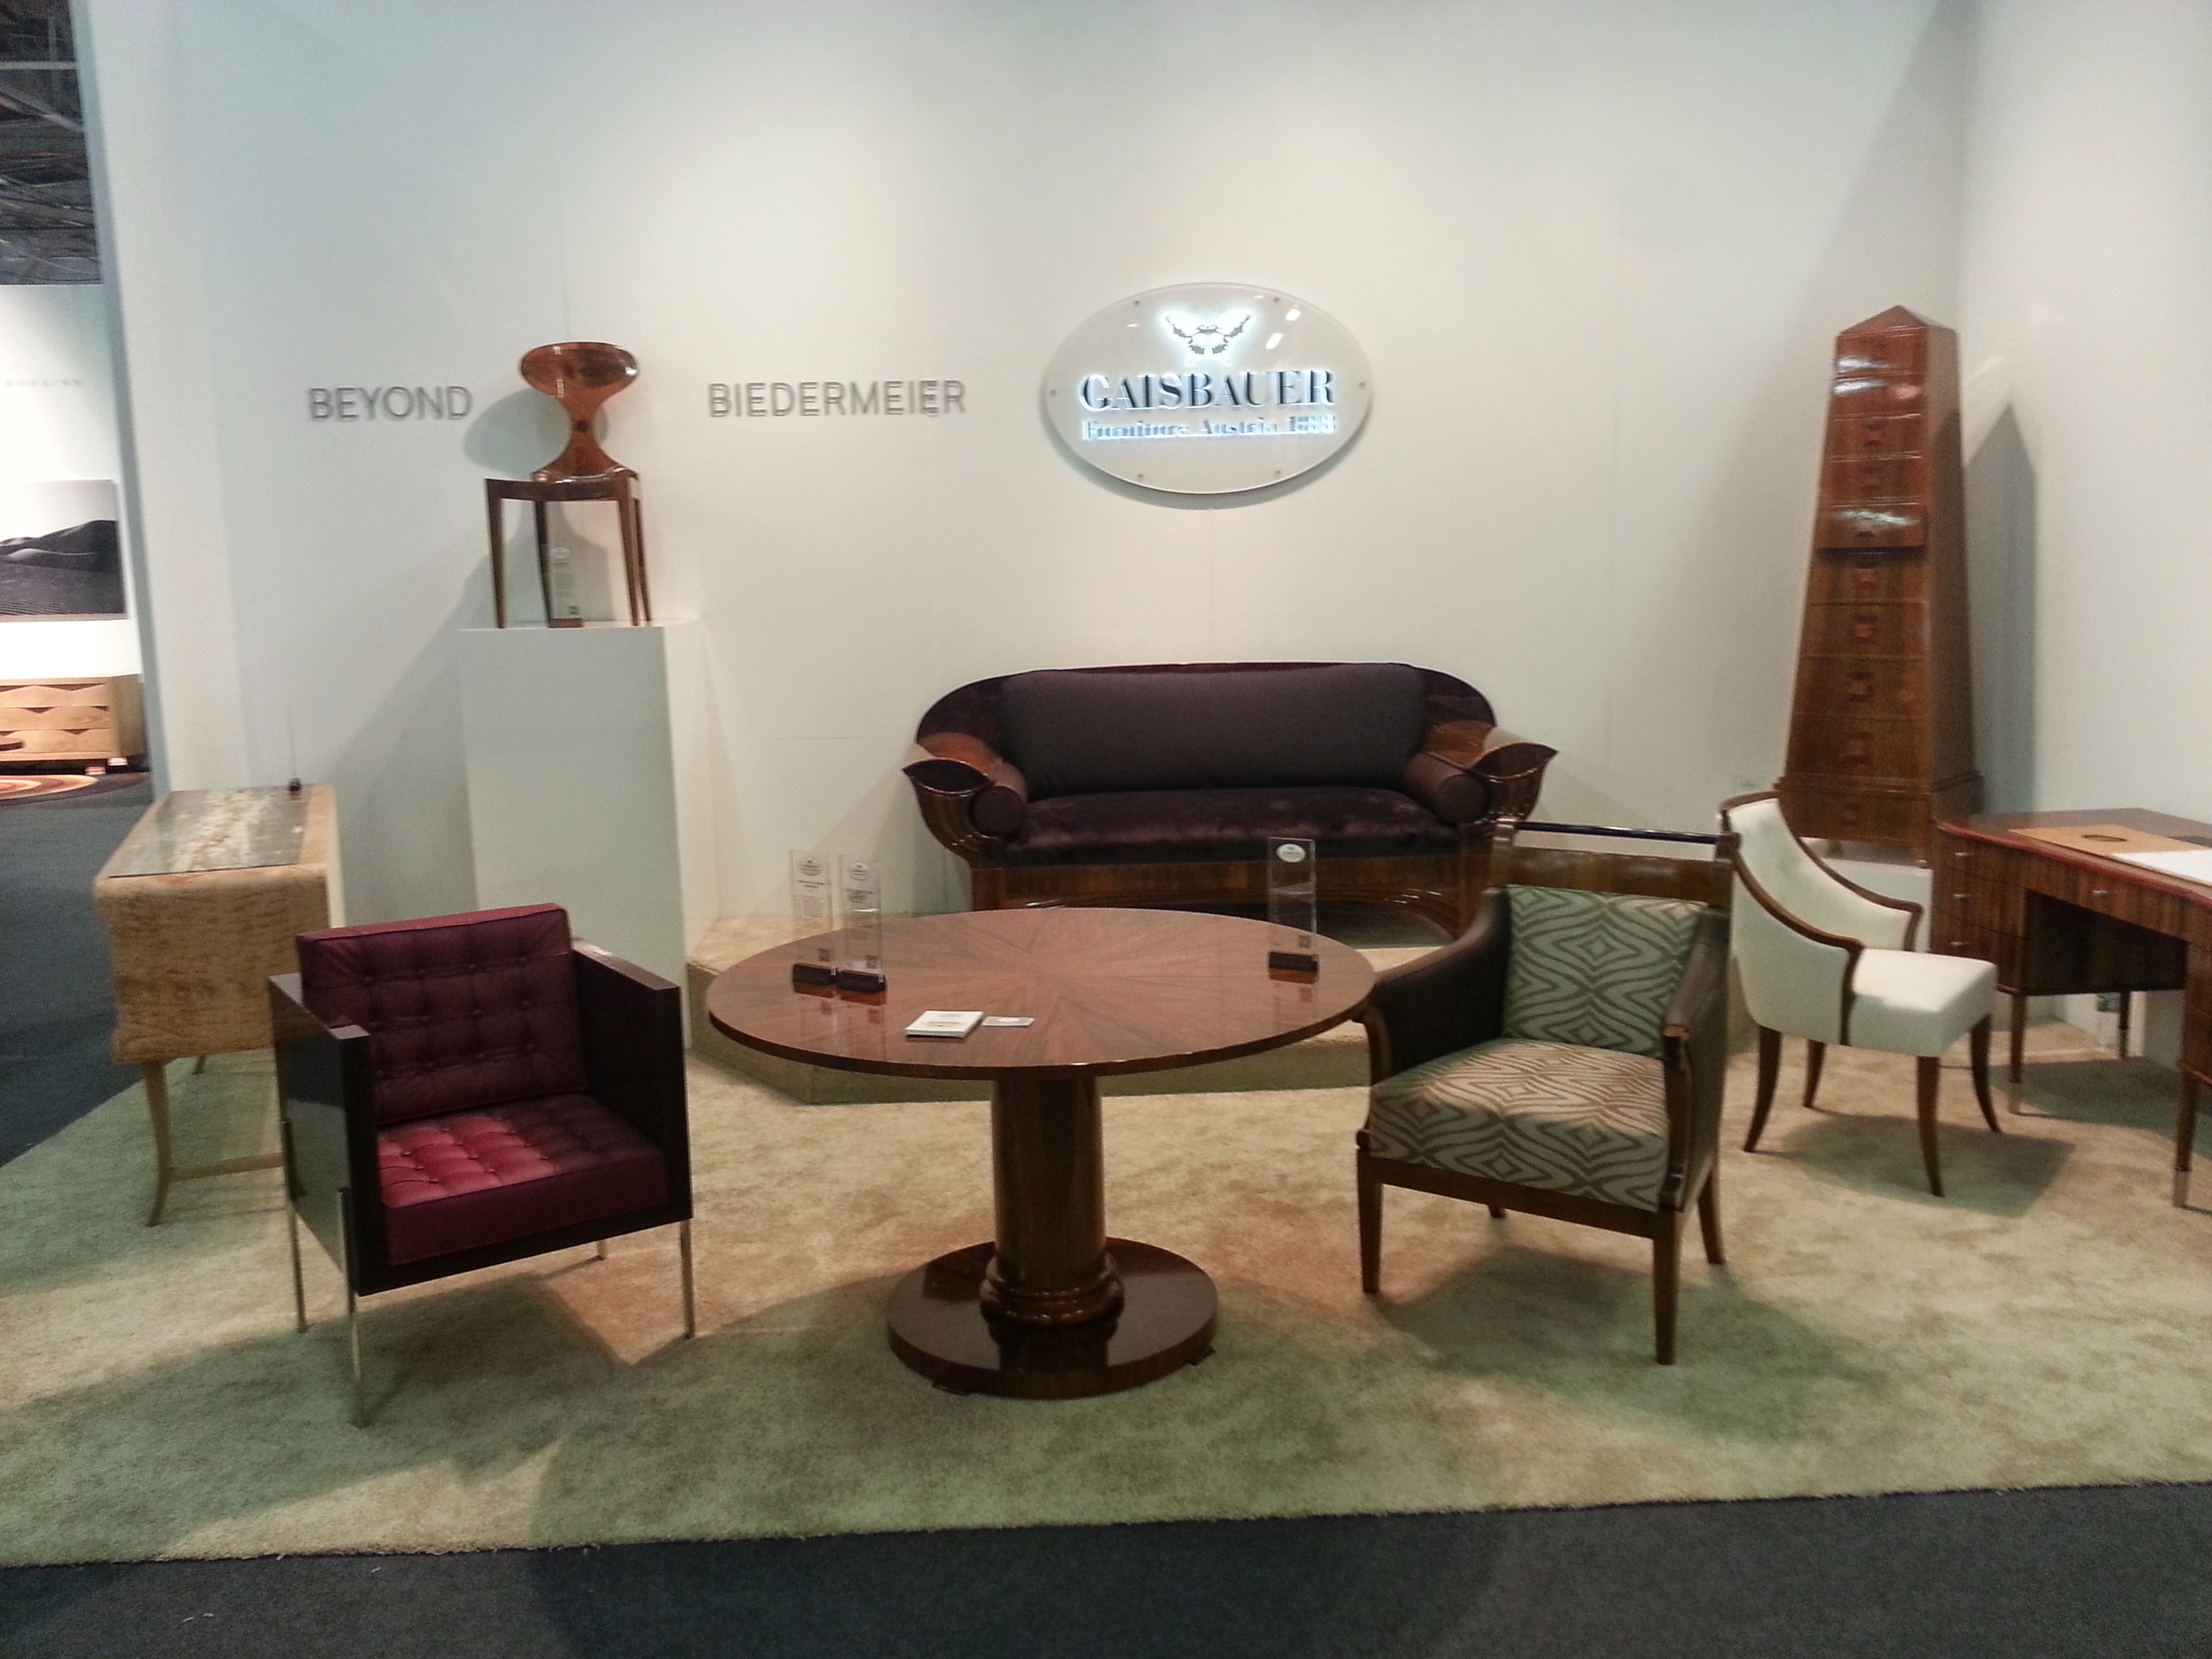 Front of Gaisbauer booth at AD2015